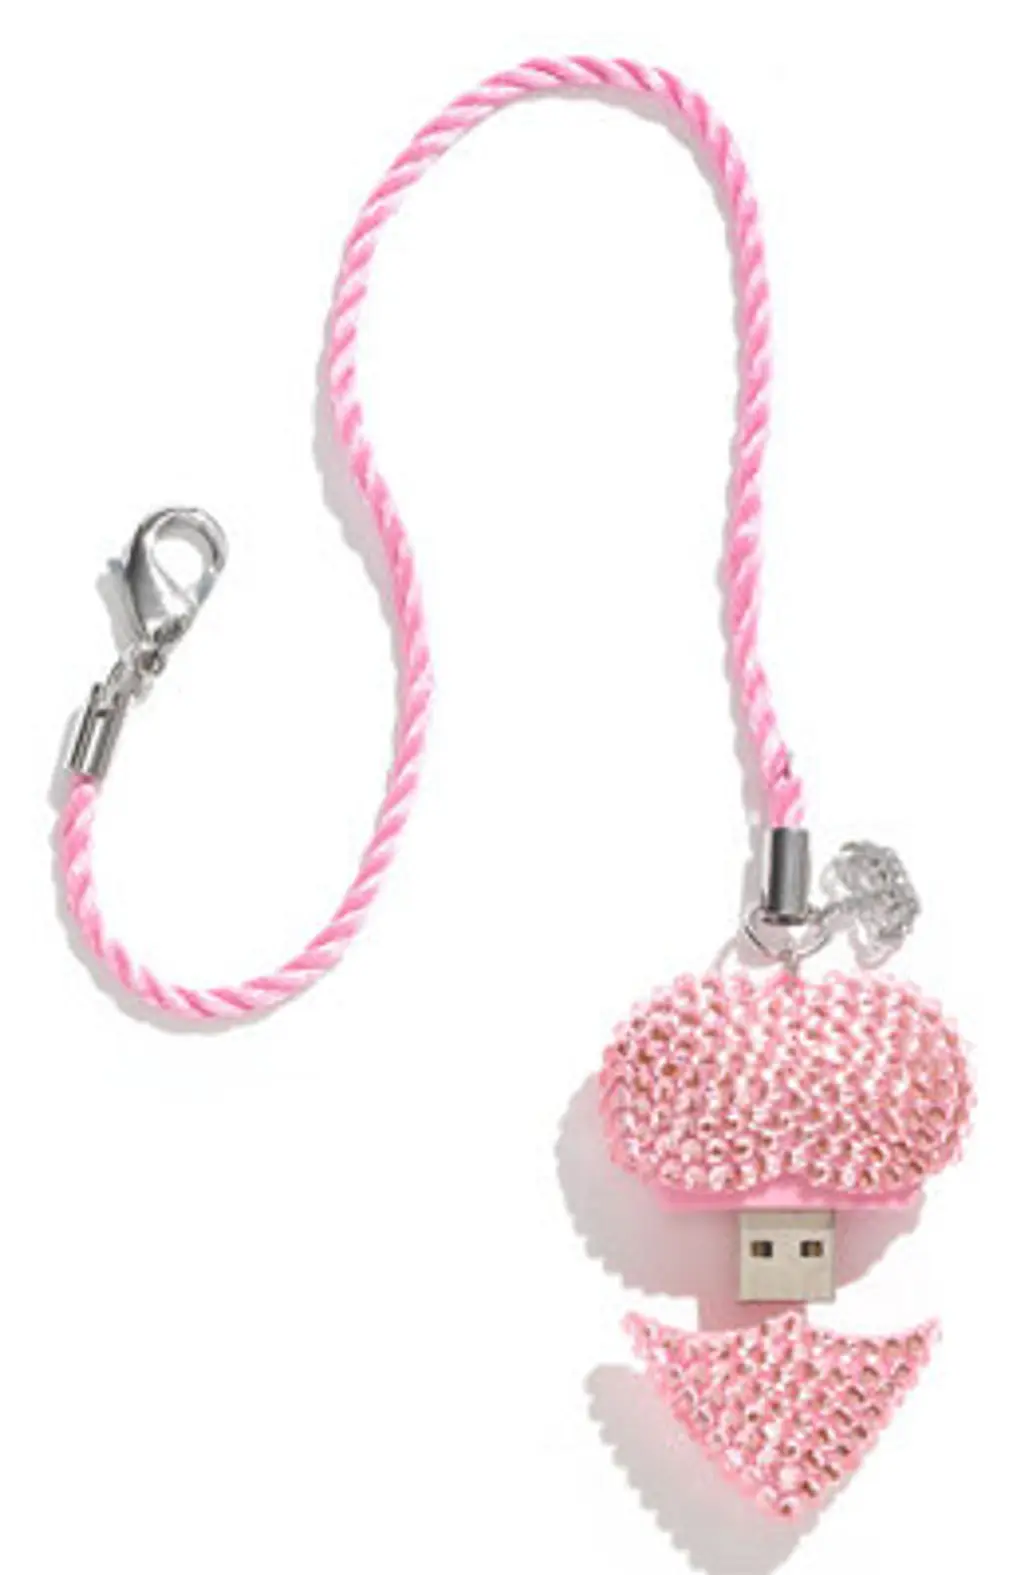 Sparkly USB from Juicy Couture